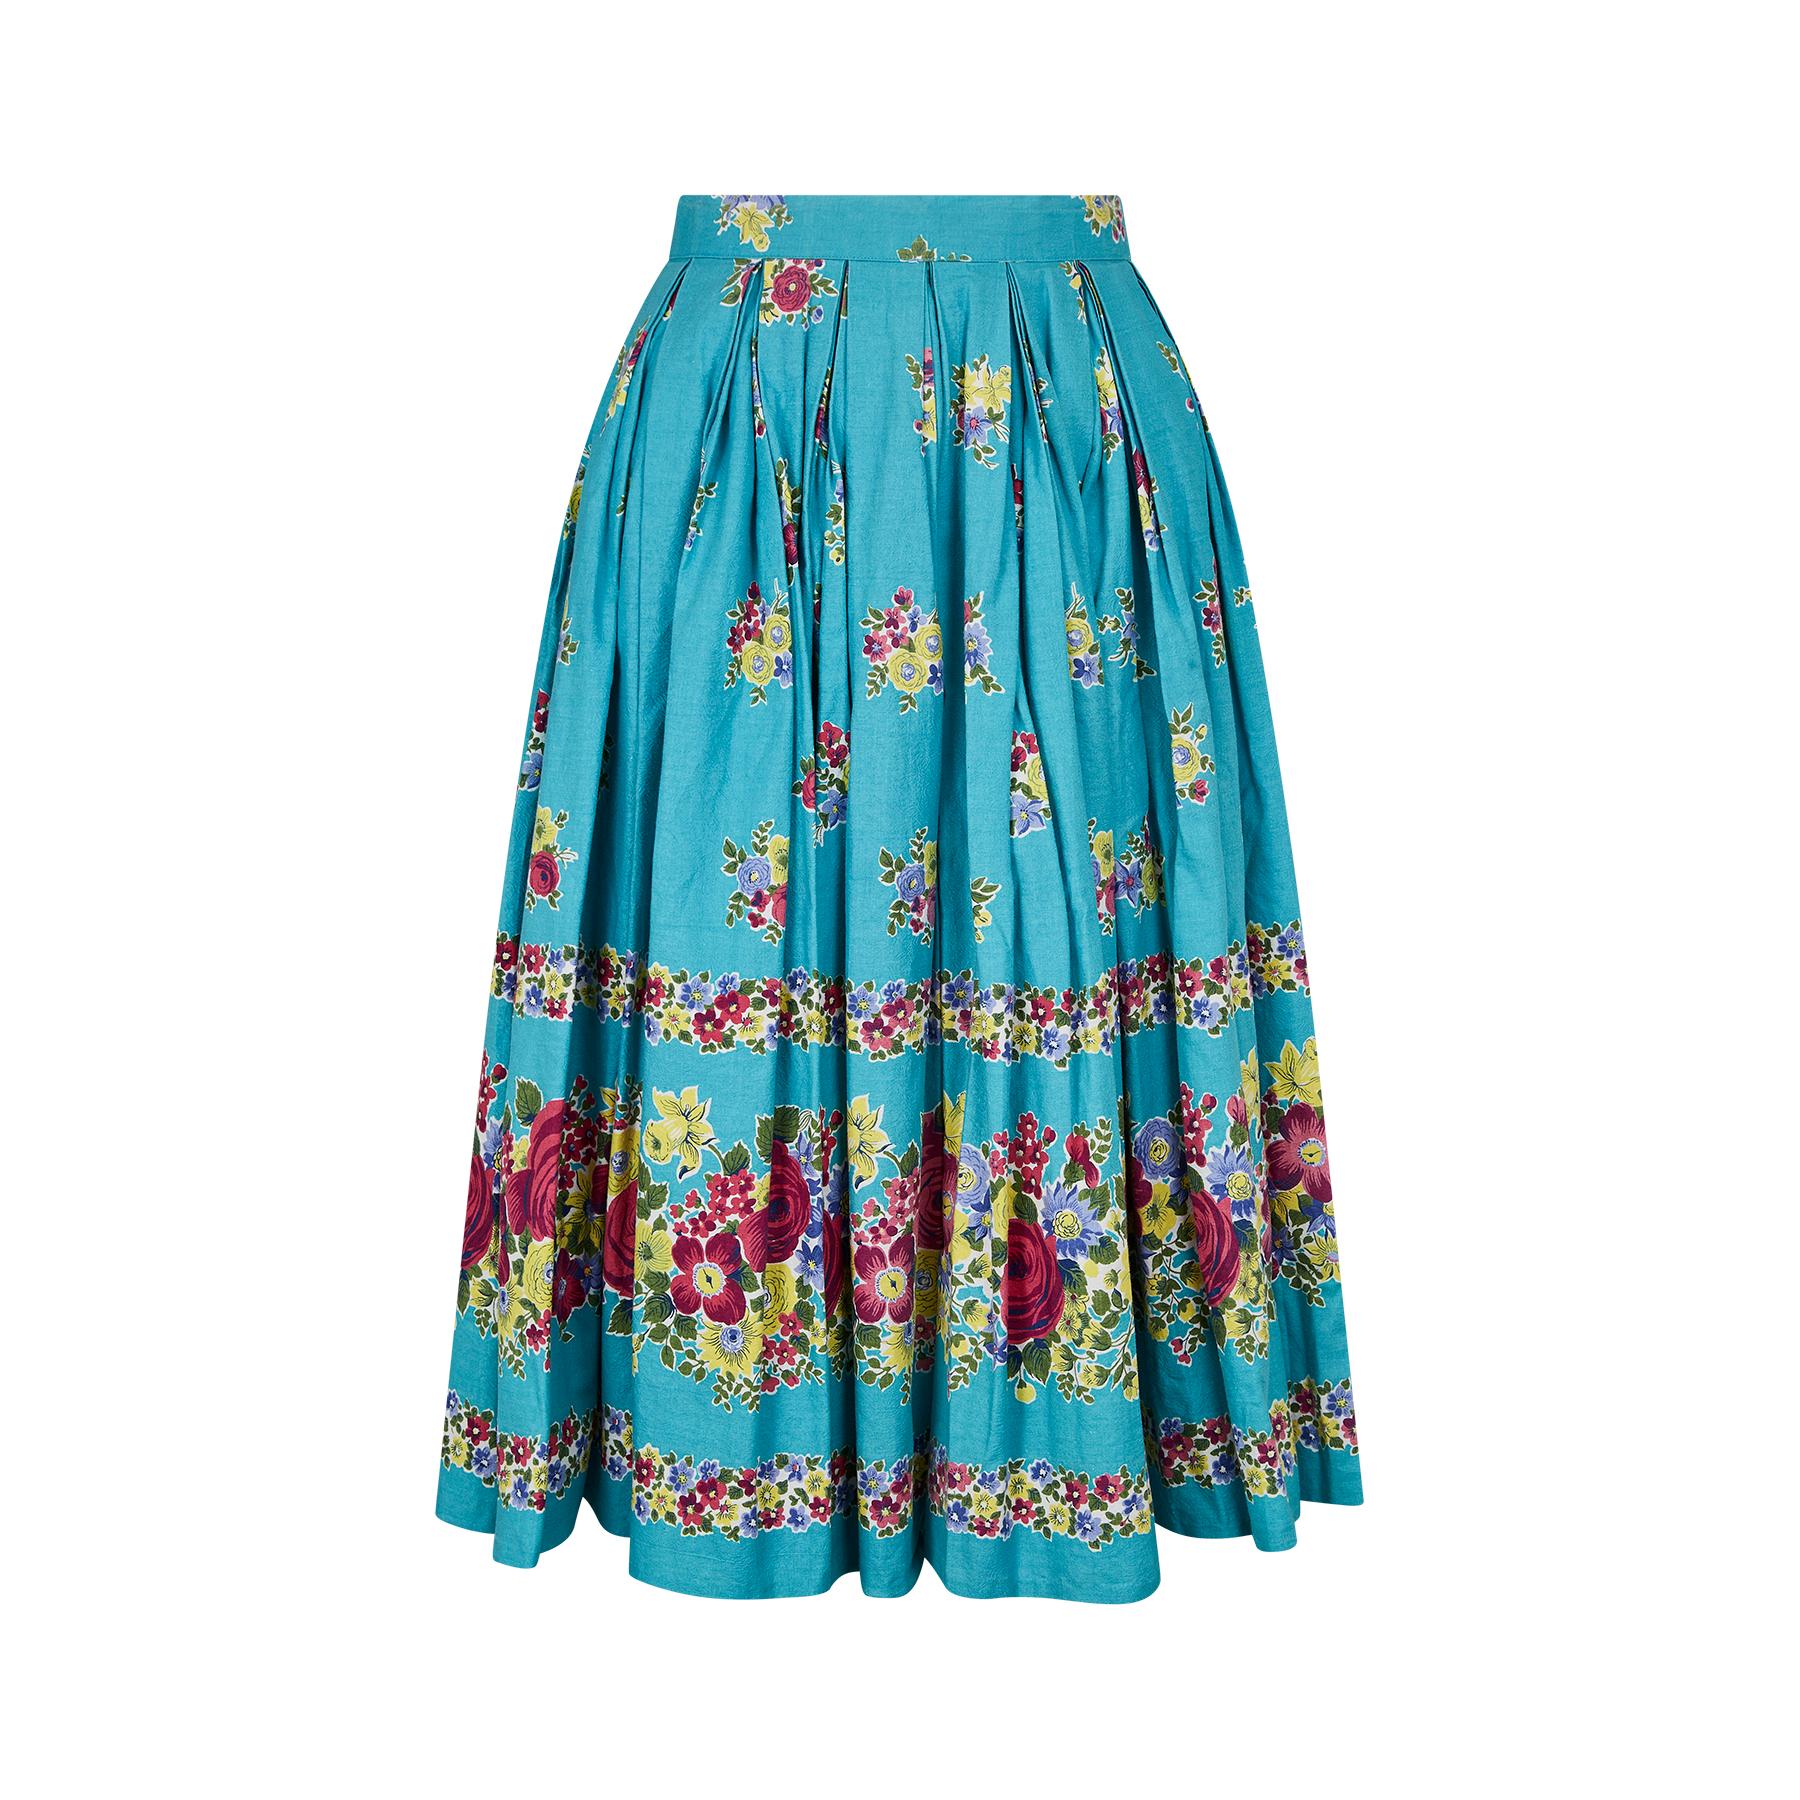 1950s Turquoise Box Pleat Floral Print Skirt For Sale